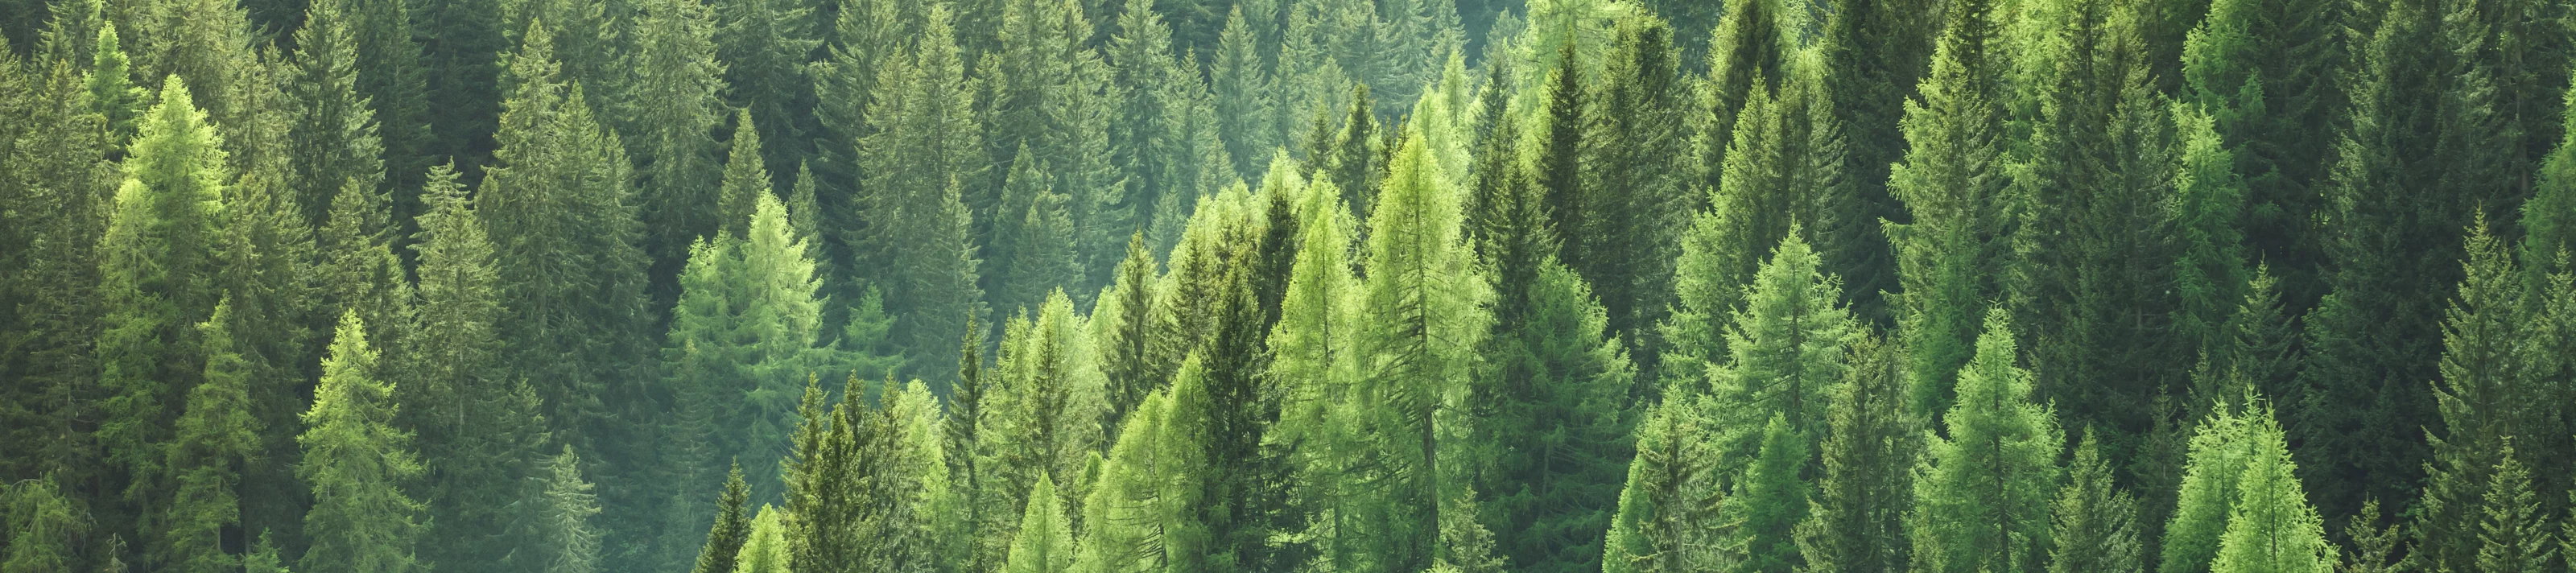 Healthy green trees in a forest of old spruce fir and pine